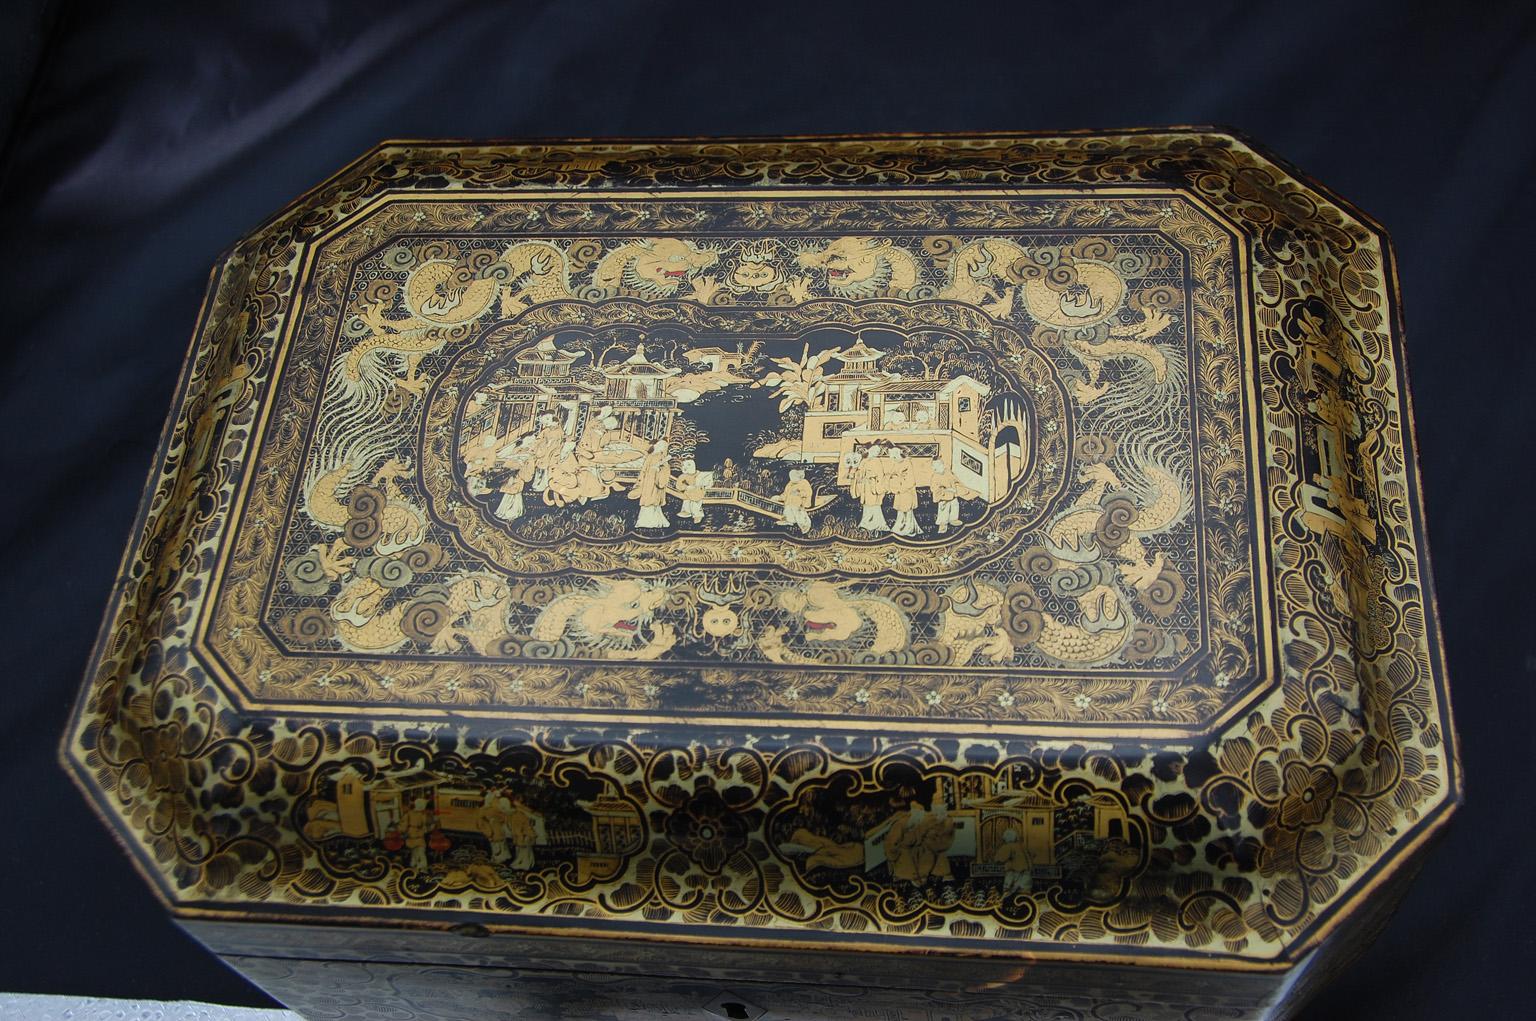 This Chinese Export early 19th century chinoiserie decorated lacquered teacaddy retains its original pair of interior pewter hand engraved double lidded tea boxes. The tea boxes have an engraved exterior lid and a plain interior lid with wooden